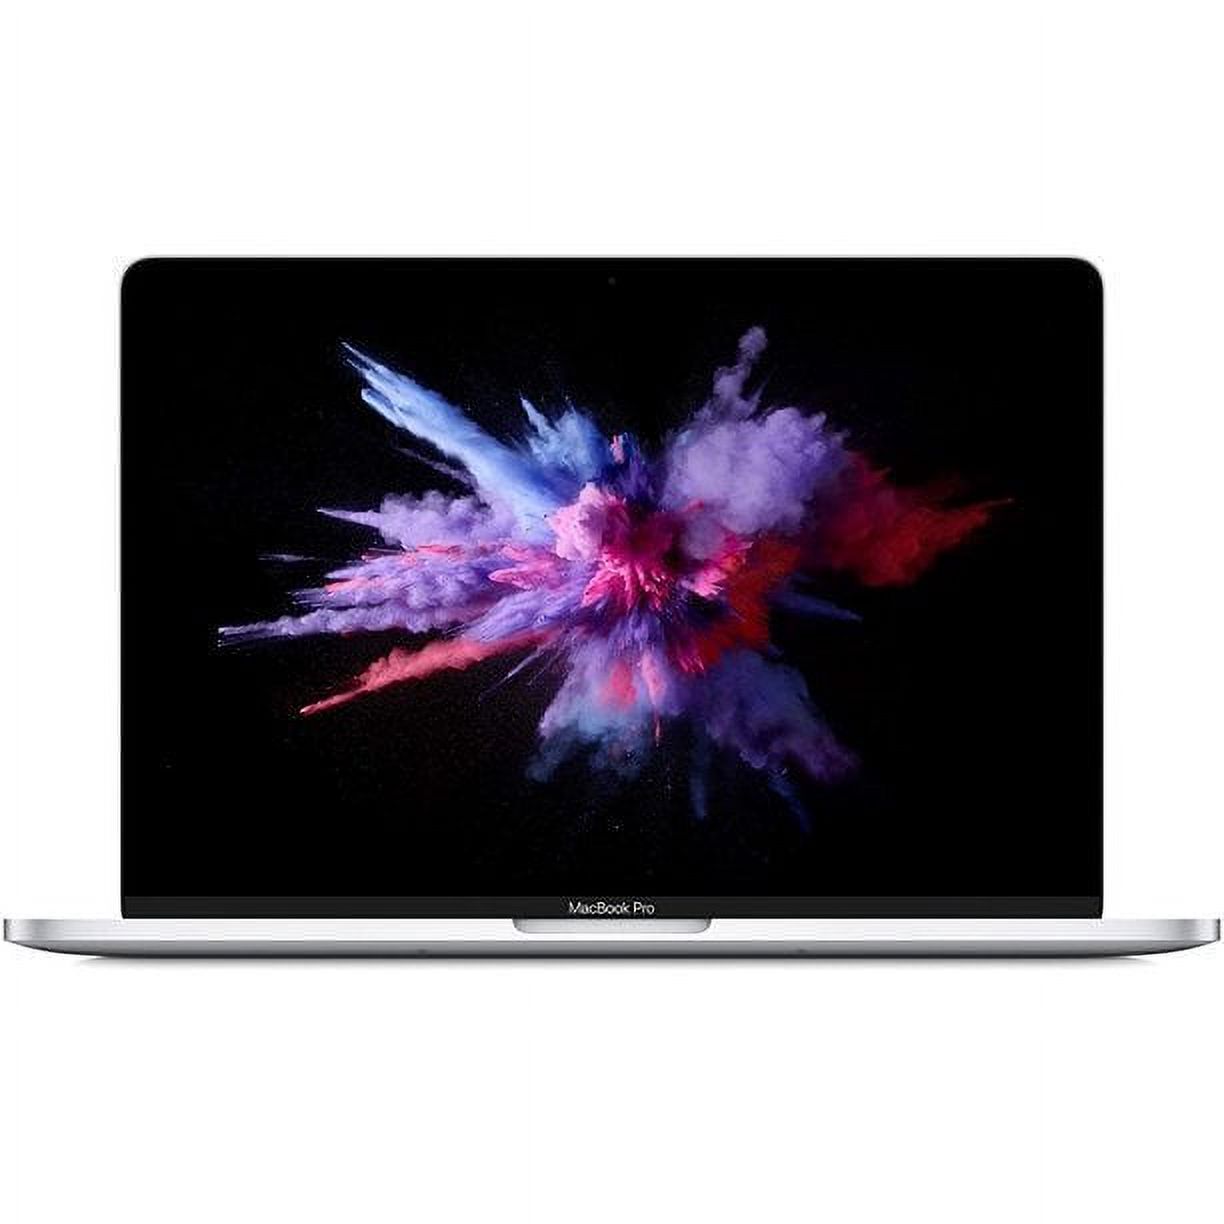 Restored Apple MacBook Pro MUHN2LL/A with 13.3" Intel Core i5 1.4GHz 8GB RAM Silver (Refurbished) - image 1 of 6